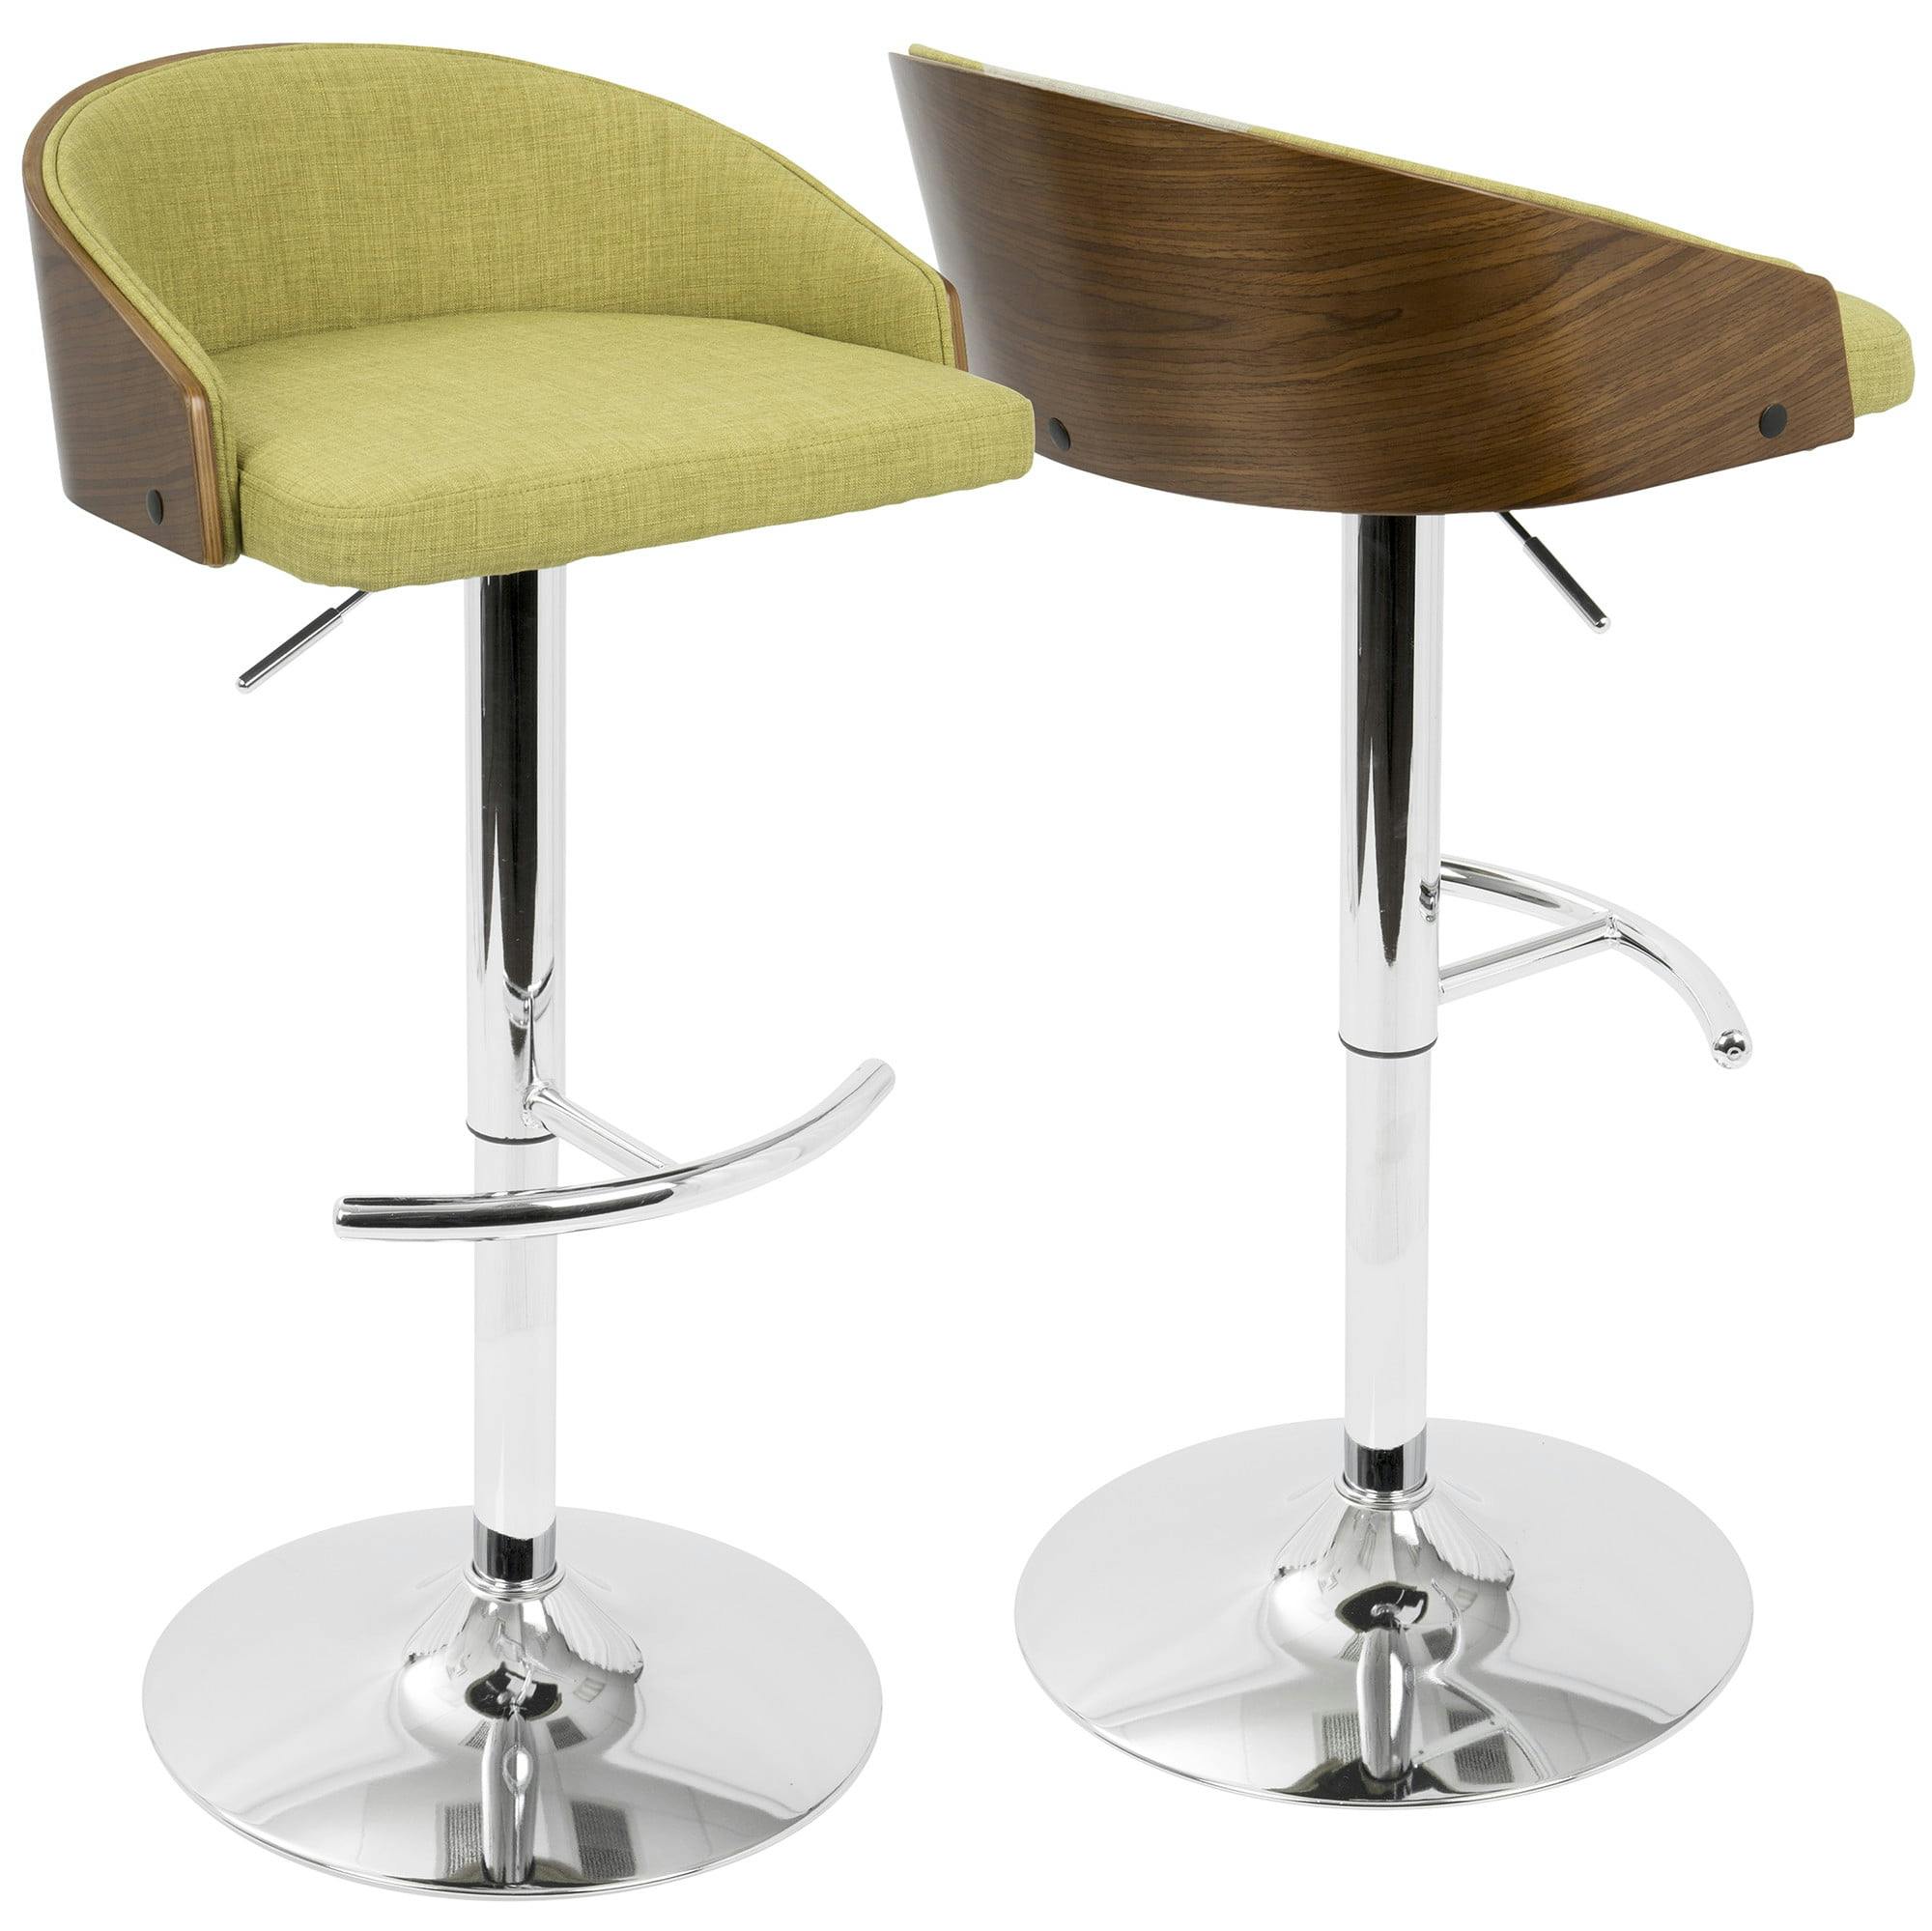 Contemporary Swivel Adjustable Barstool in Walnut and Green